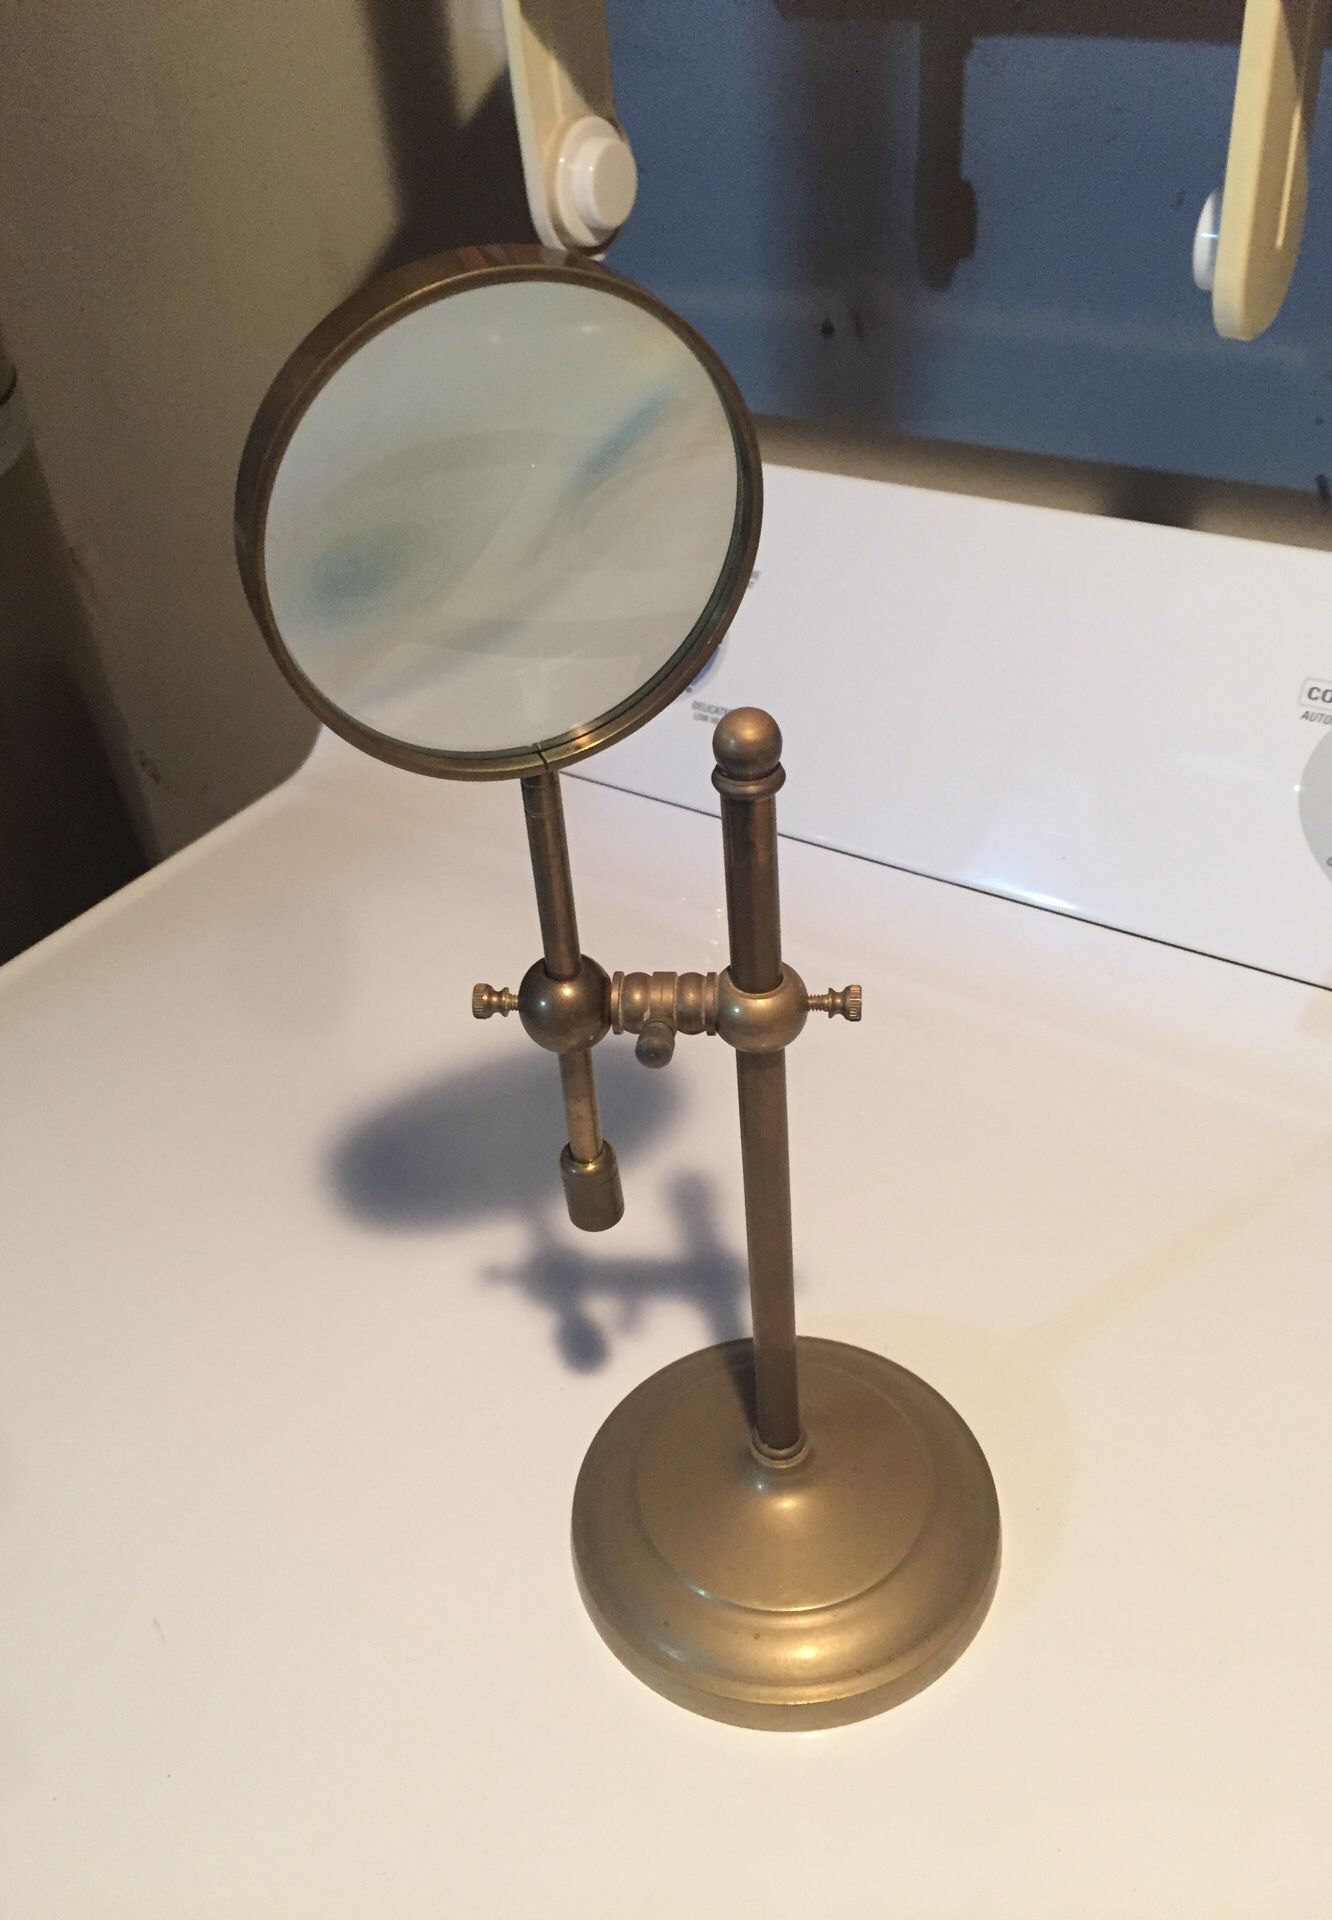 Vintage adjustable magnifying glass on stand (brass)